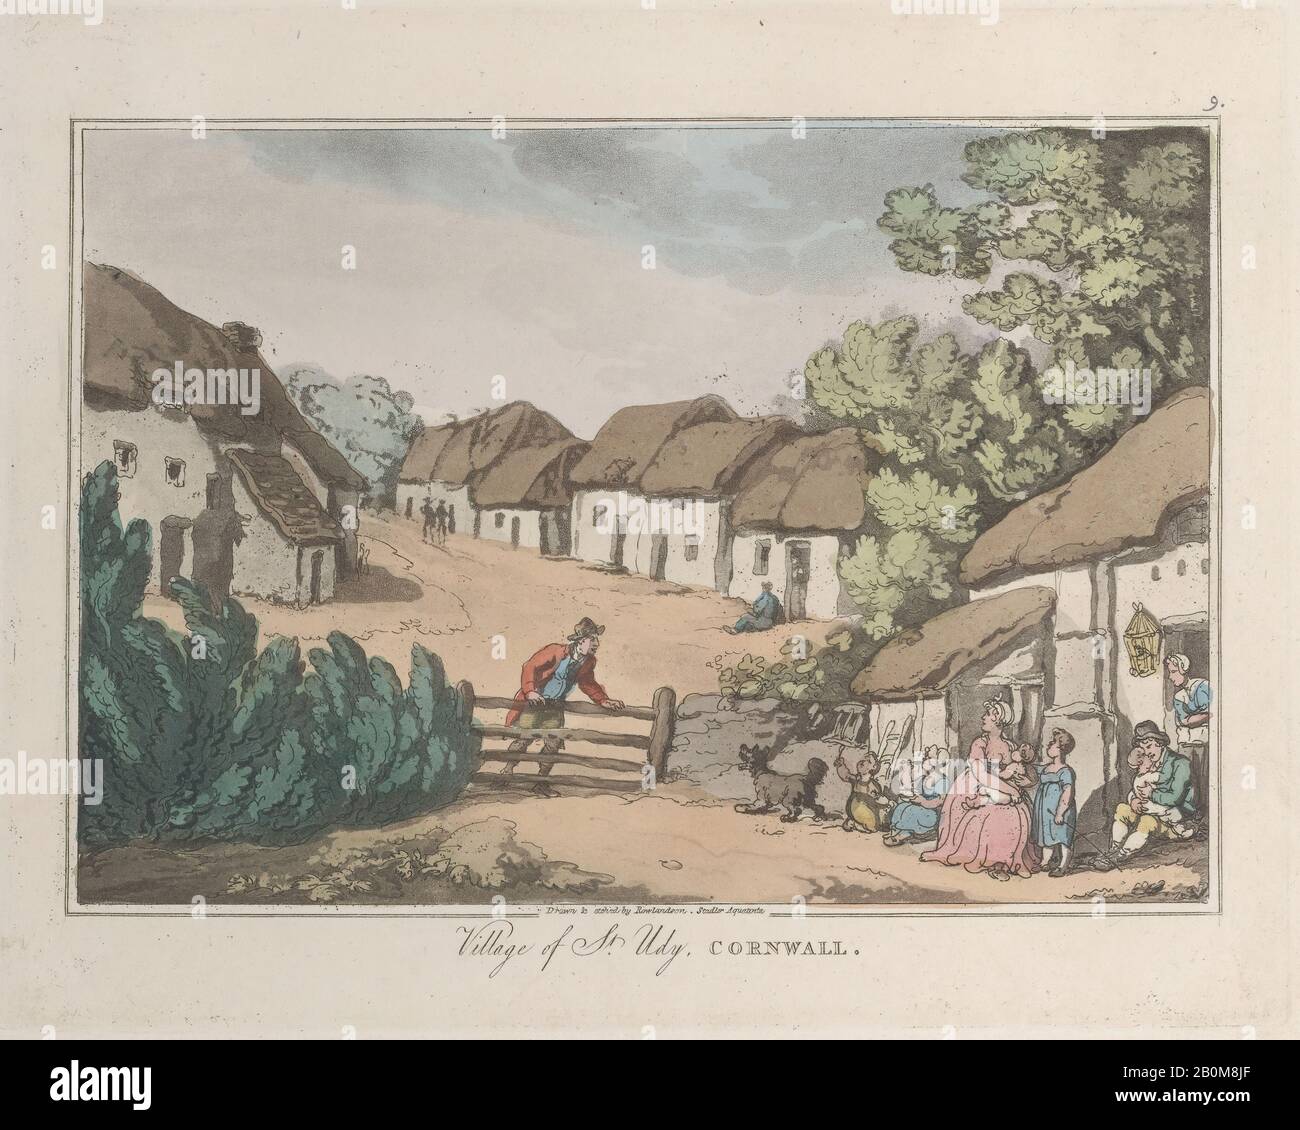 Etched by Thomas Rowlandson, Village of St. Udy, Cornwall, from 'Sketches from Nature', 'Sketches from Nature', Etched by Thomas Rowlandson (British, London 1757–1827 London), Aquatint by Joseph Constantine Stadler (German, active London, 1780–1822), 1822, Hand-colored etching and aquatint, Plate: 7 3/8 × 9 5/16 in. (18.7 × 23.6 cm), Sheet: 7 3/4 × 9 3/4 in. (19.7 × 24.7 cm), Prints Stock Photo